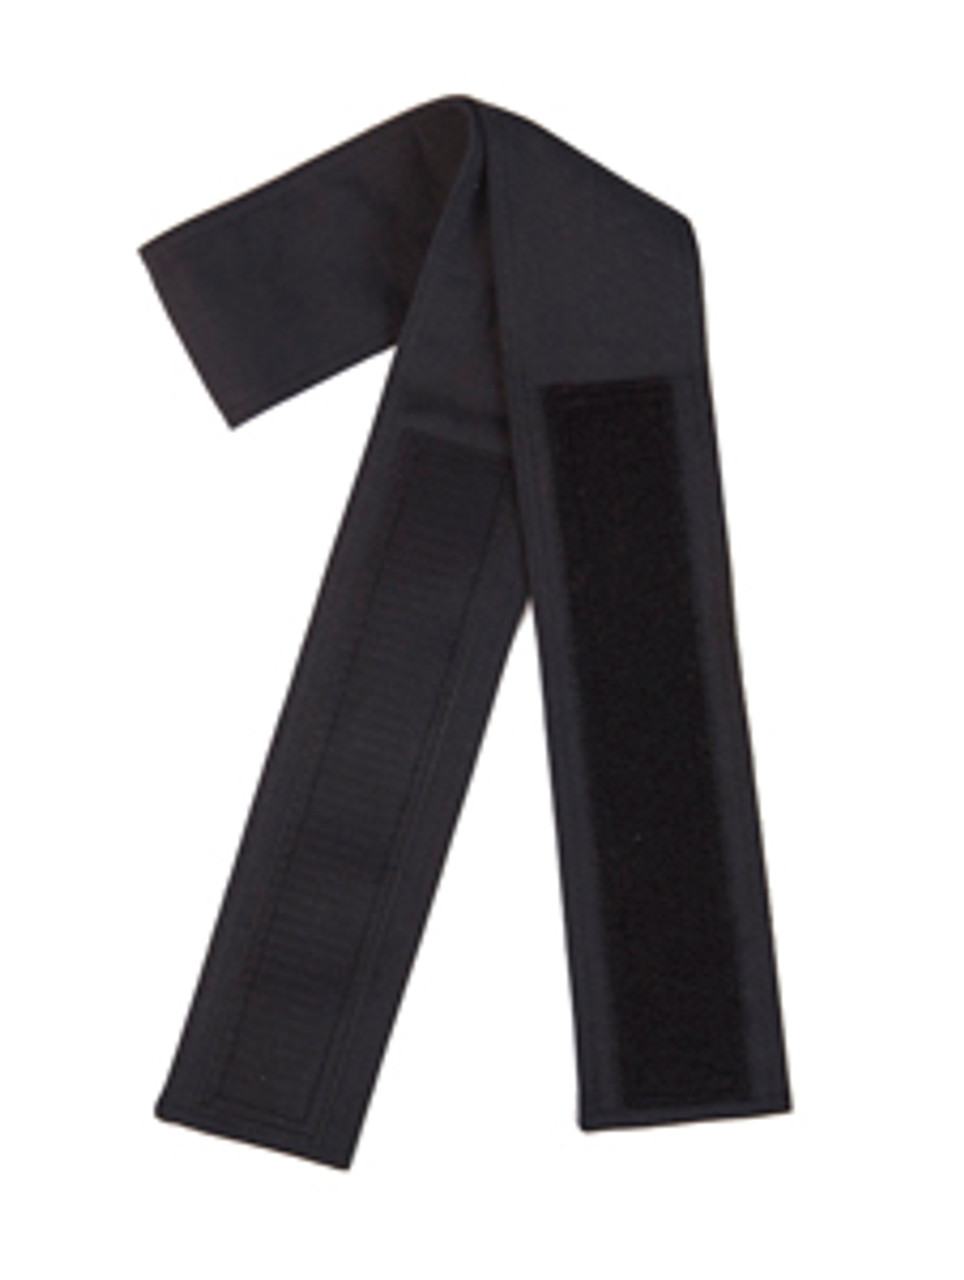 Black Velcro Fabric Belt (3 inches wide and 40 to 48 inches long; with 2  inches